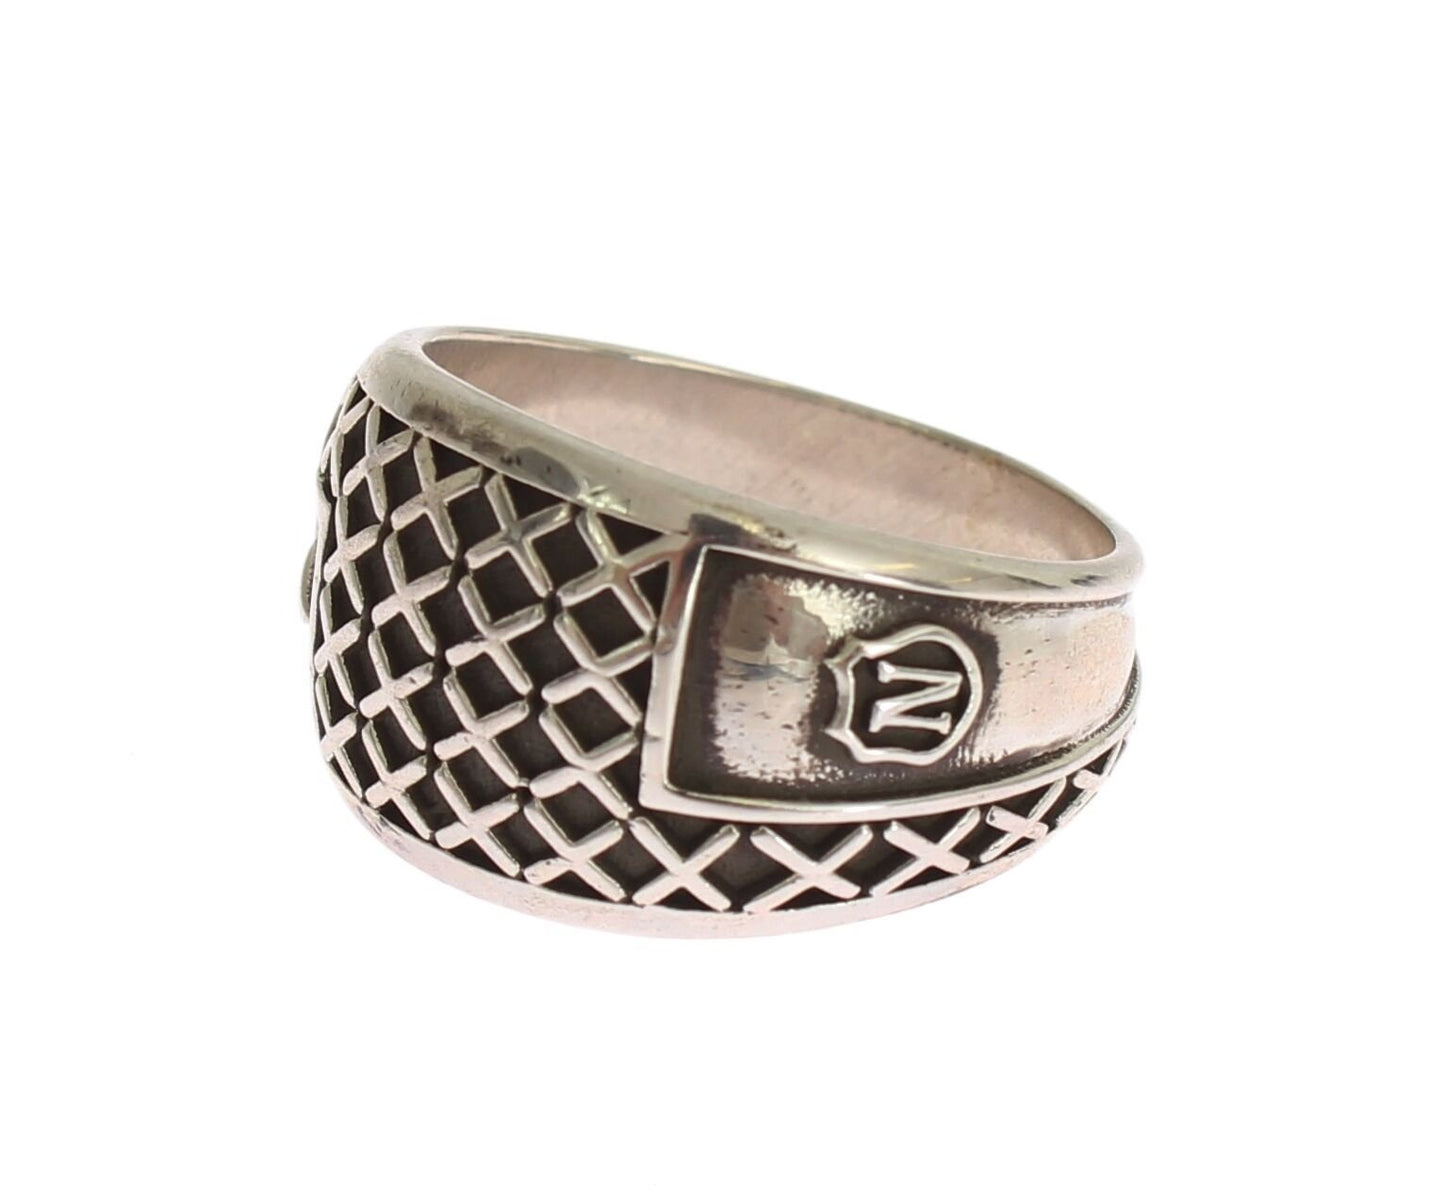 Nialaya Elegant Silver Band with Black Accents